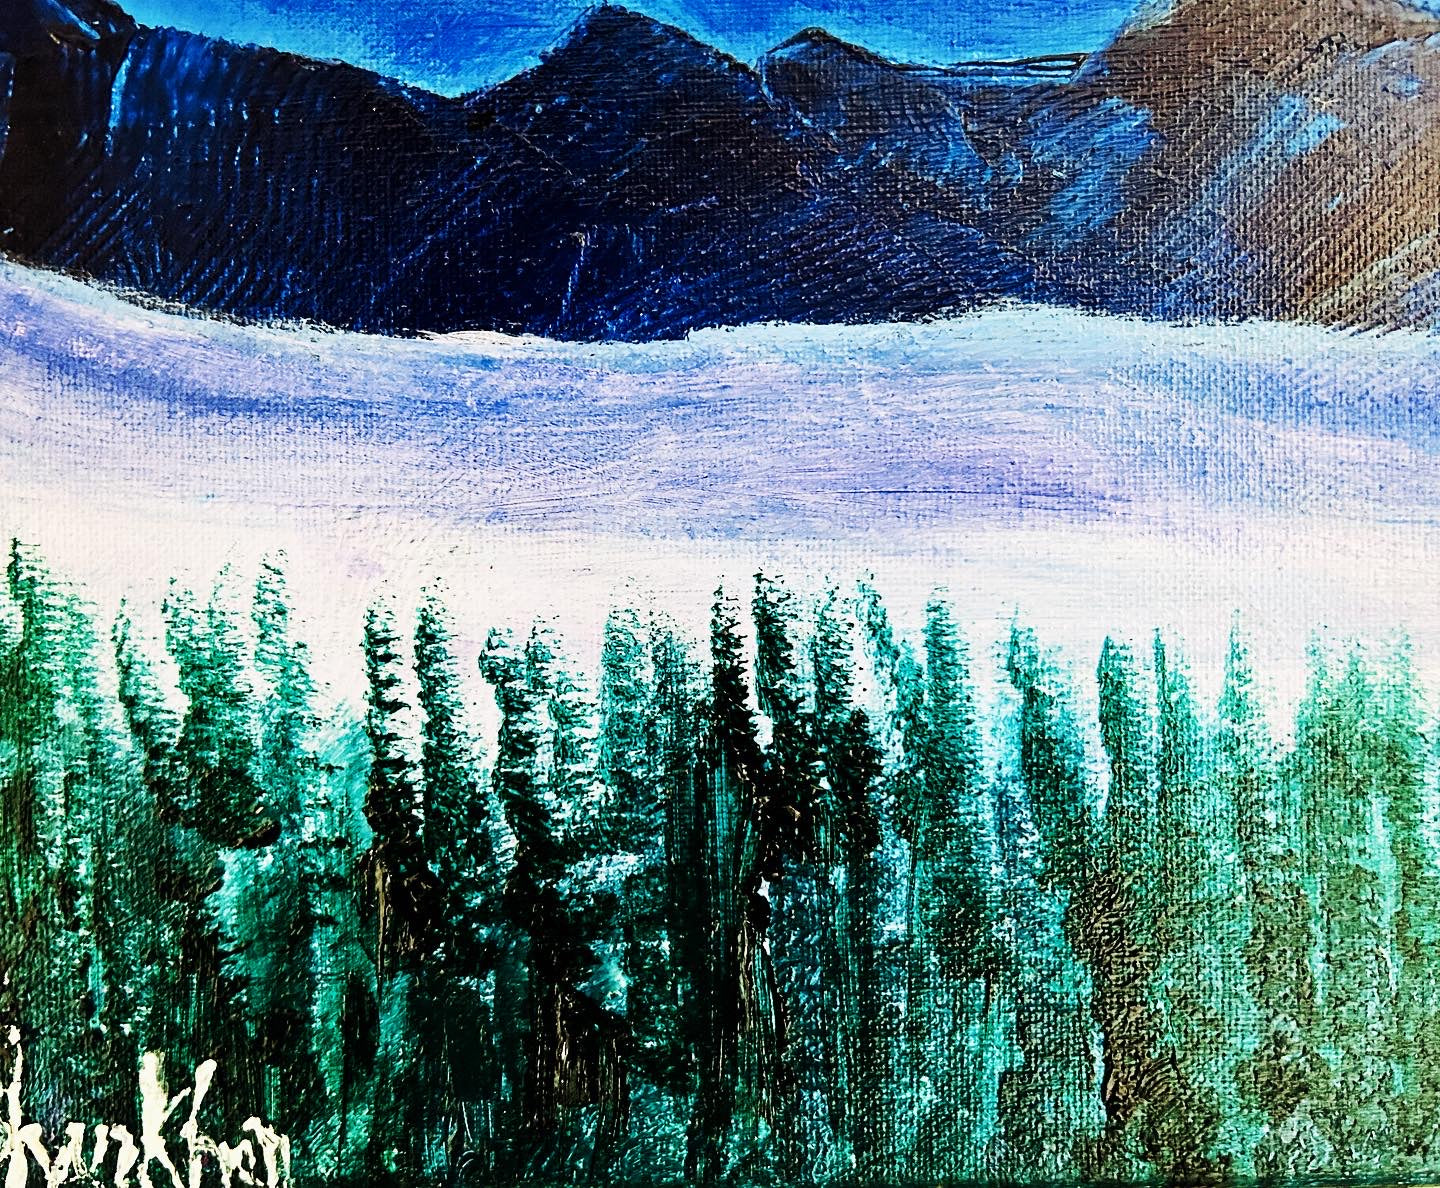 Blue mountains, painting